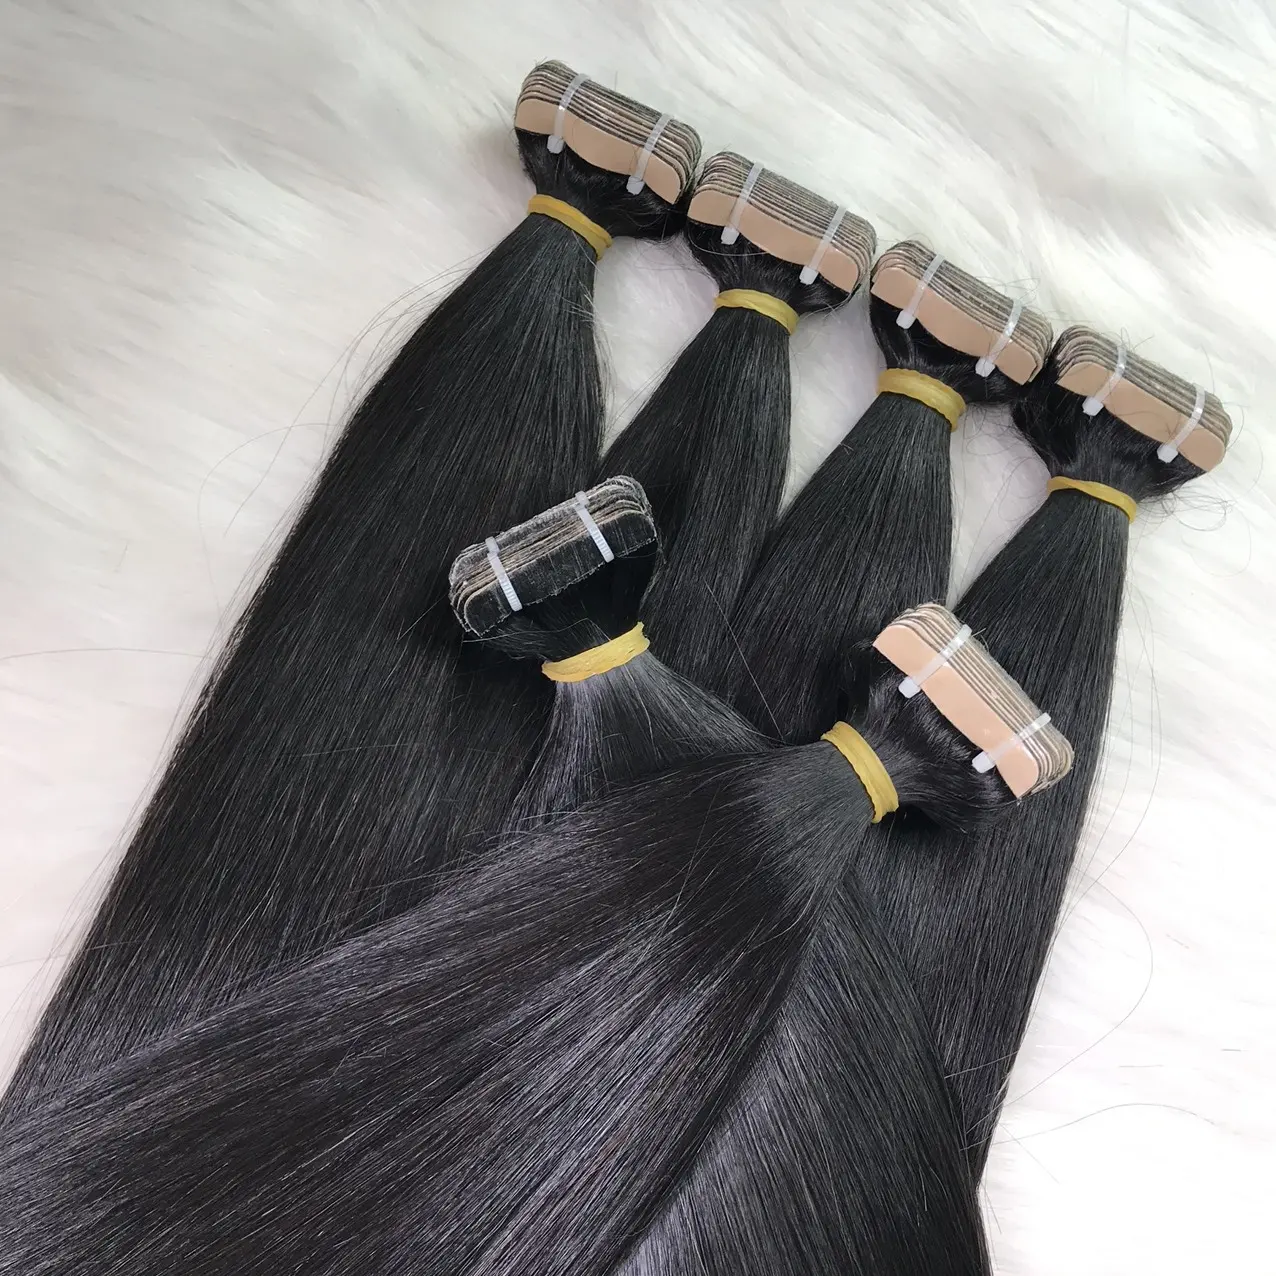 High Quality Human Hair Extensions Tape-in, 8-40 Inches Vietnamese Remy Human Hair Bundles Wholesale Price Hair Vendor